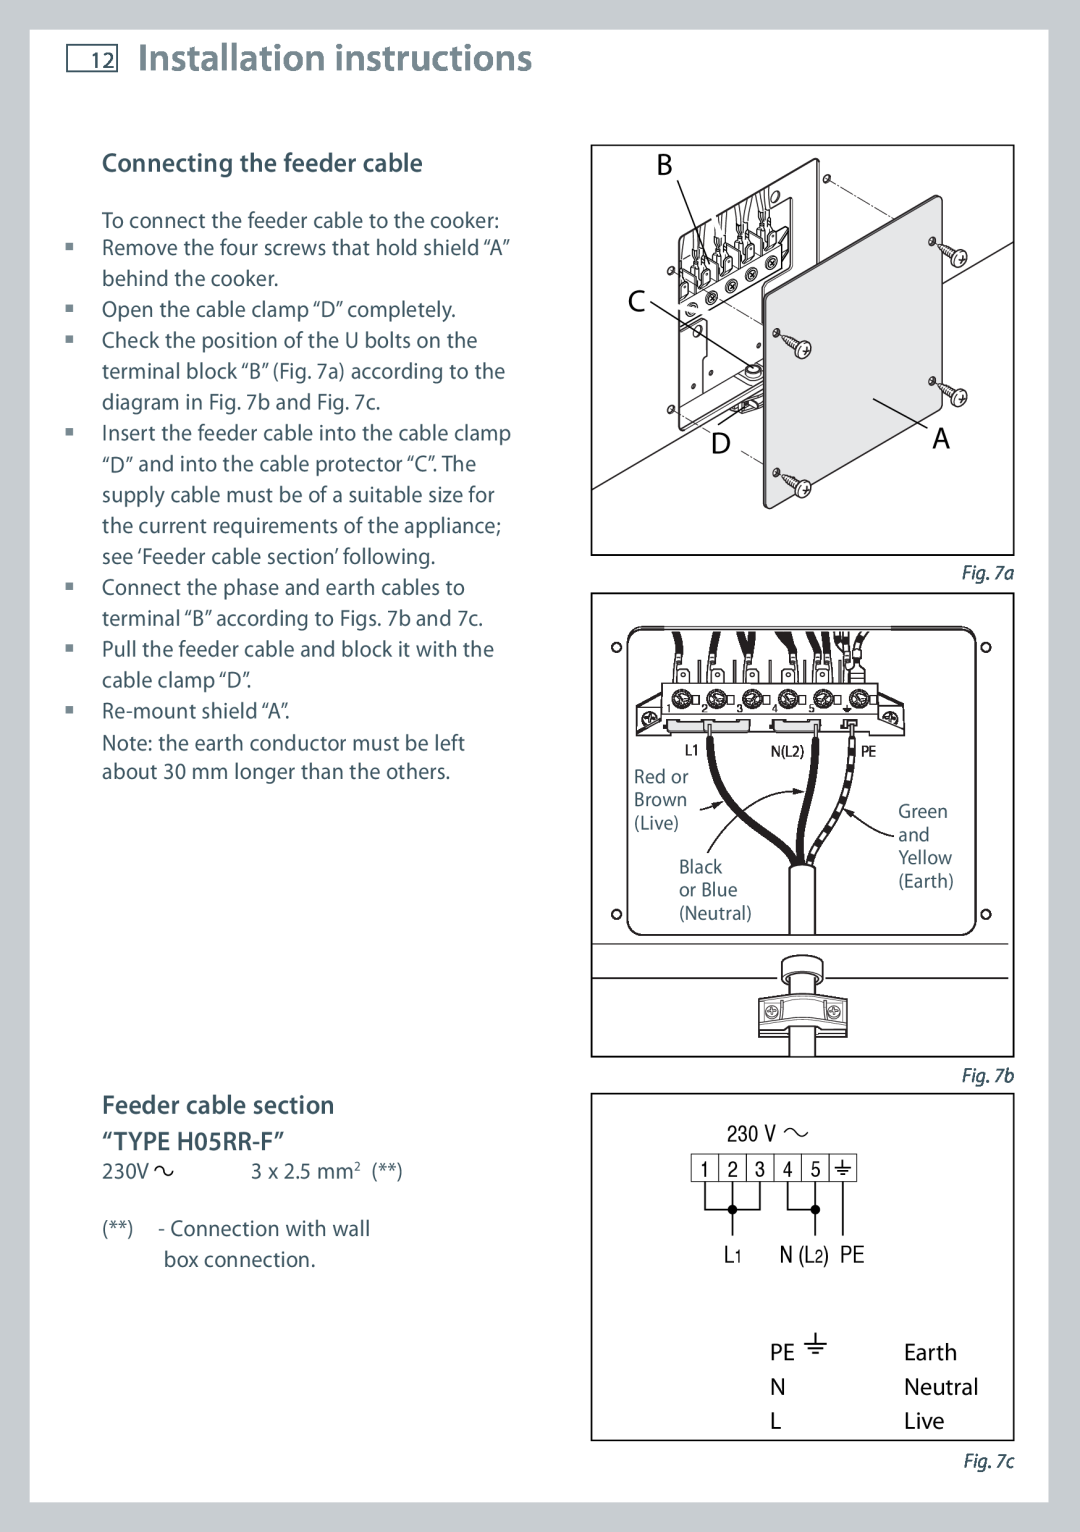 Fisher & Paykel OR120 Installation instructions, B C Da, Connecting the feeder cable, N Neutral LLive 